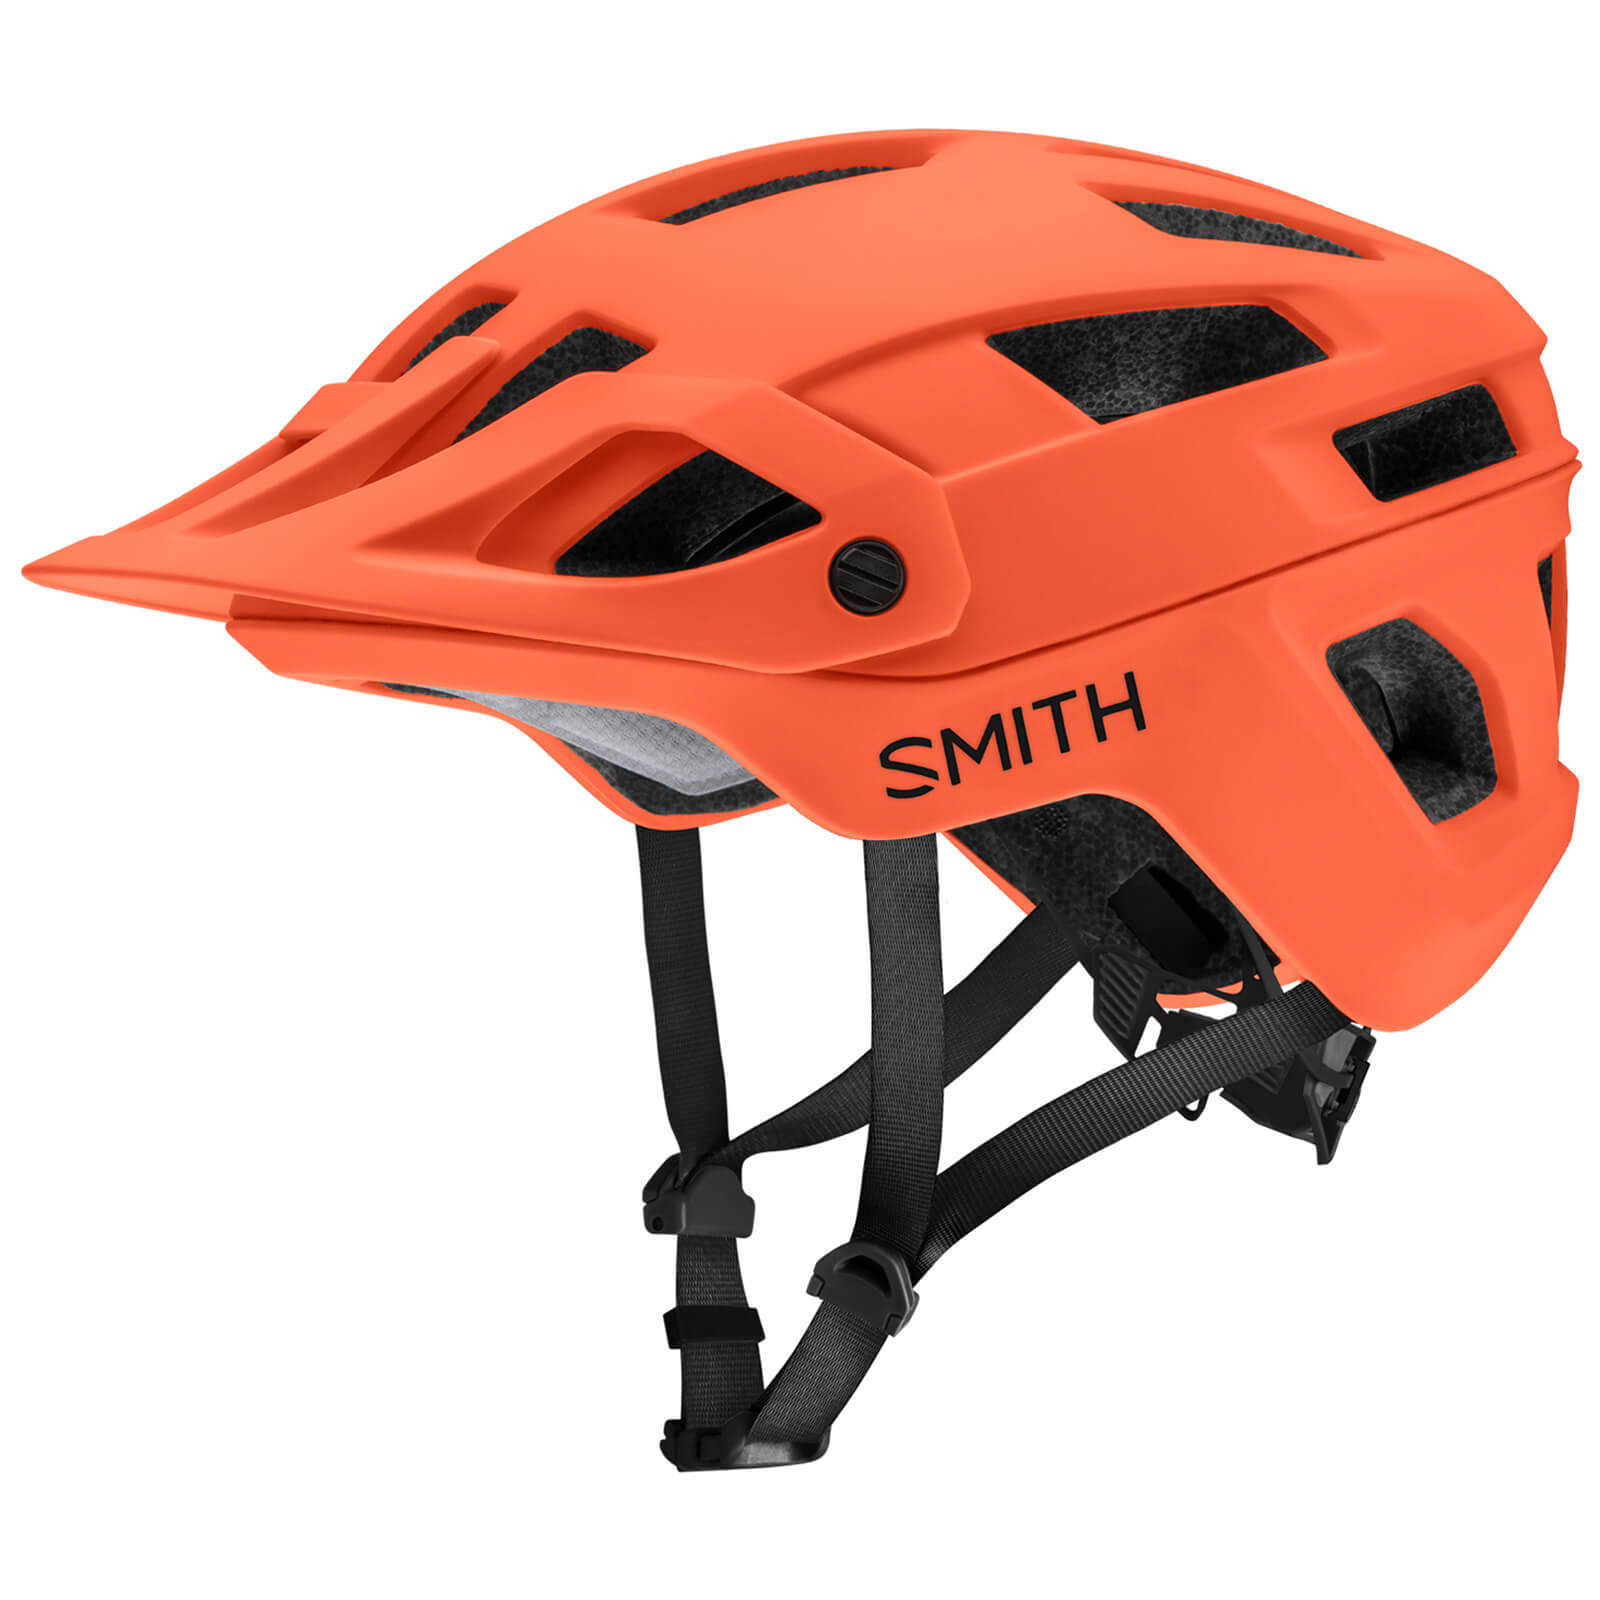 Smith Engage MIPS MTB Helmet - Small - Matte Cinder